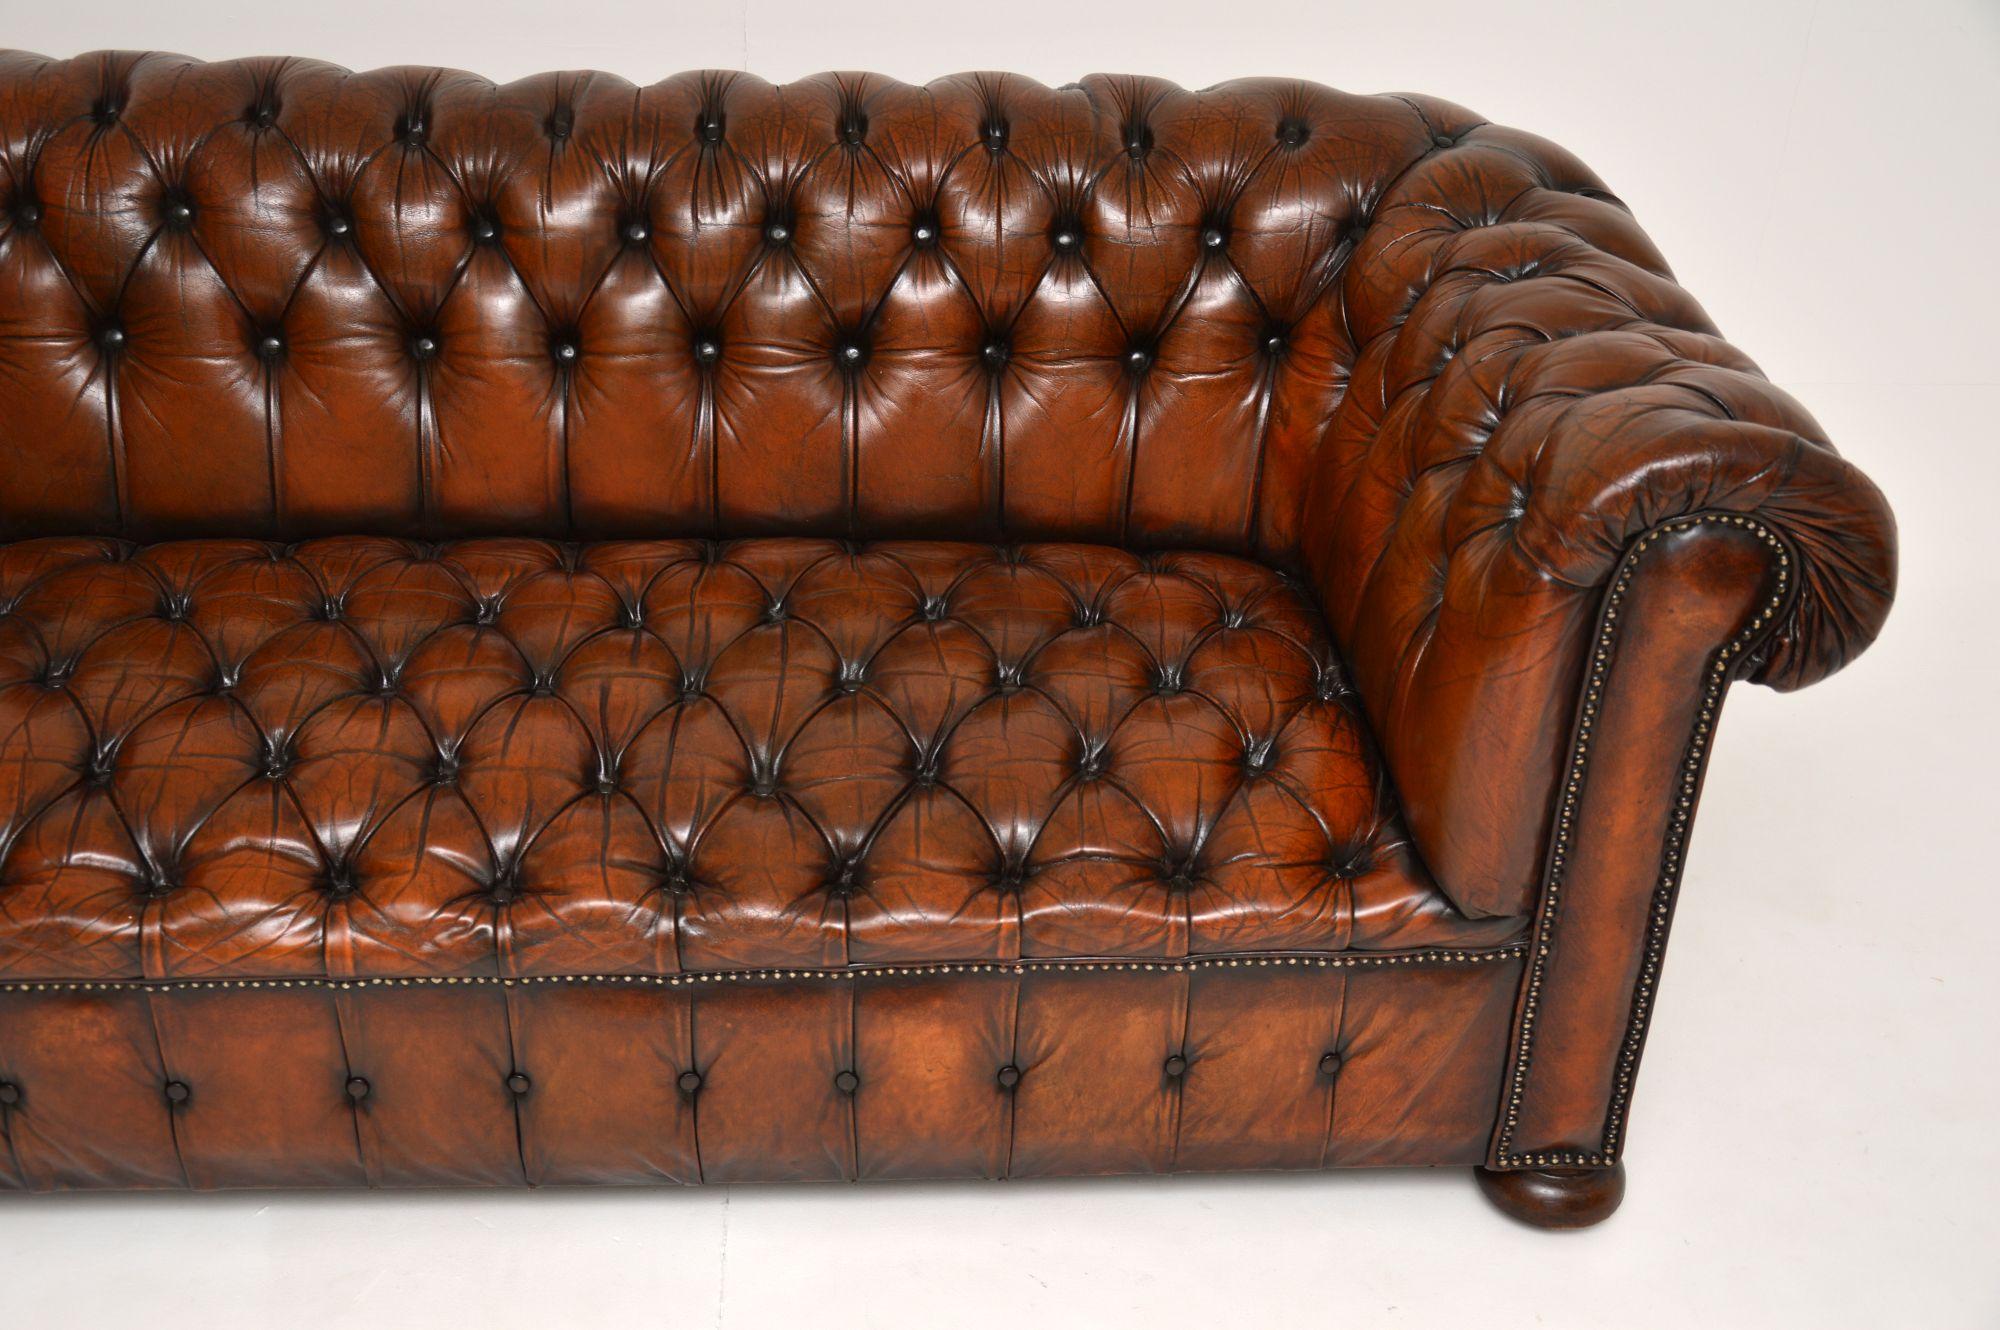 20th Century Antique Deep Buttoned Leather Chesterfield Sofa